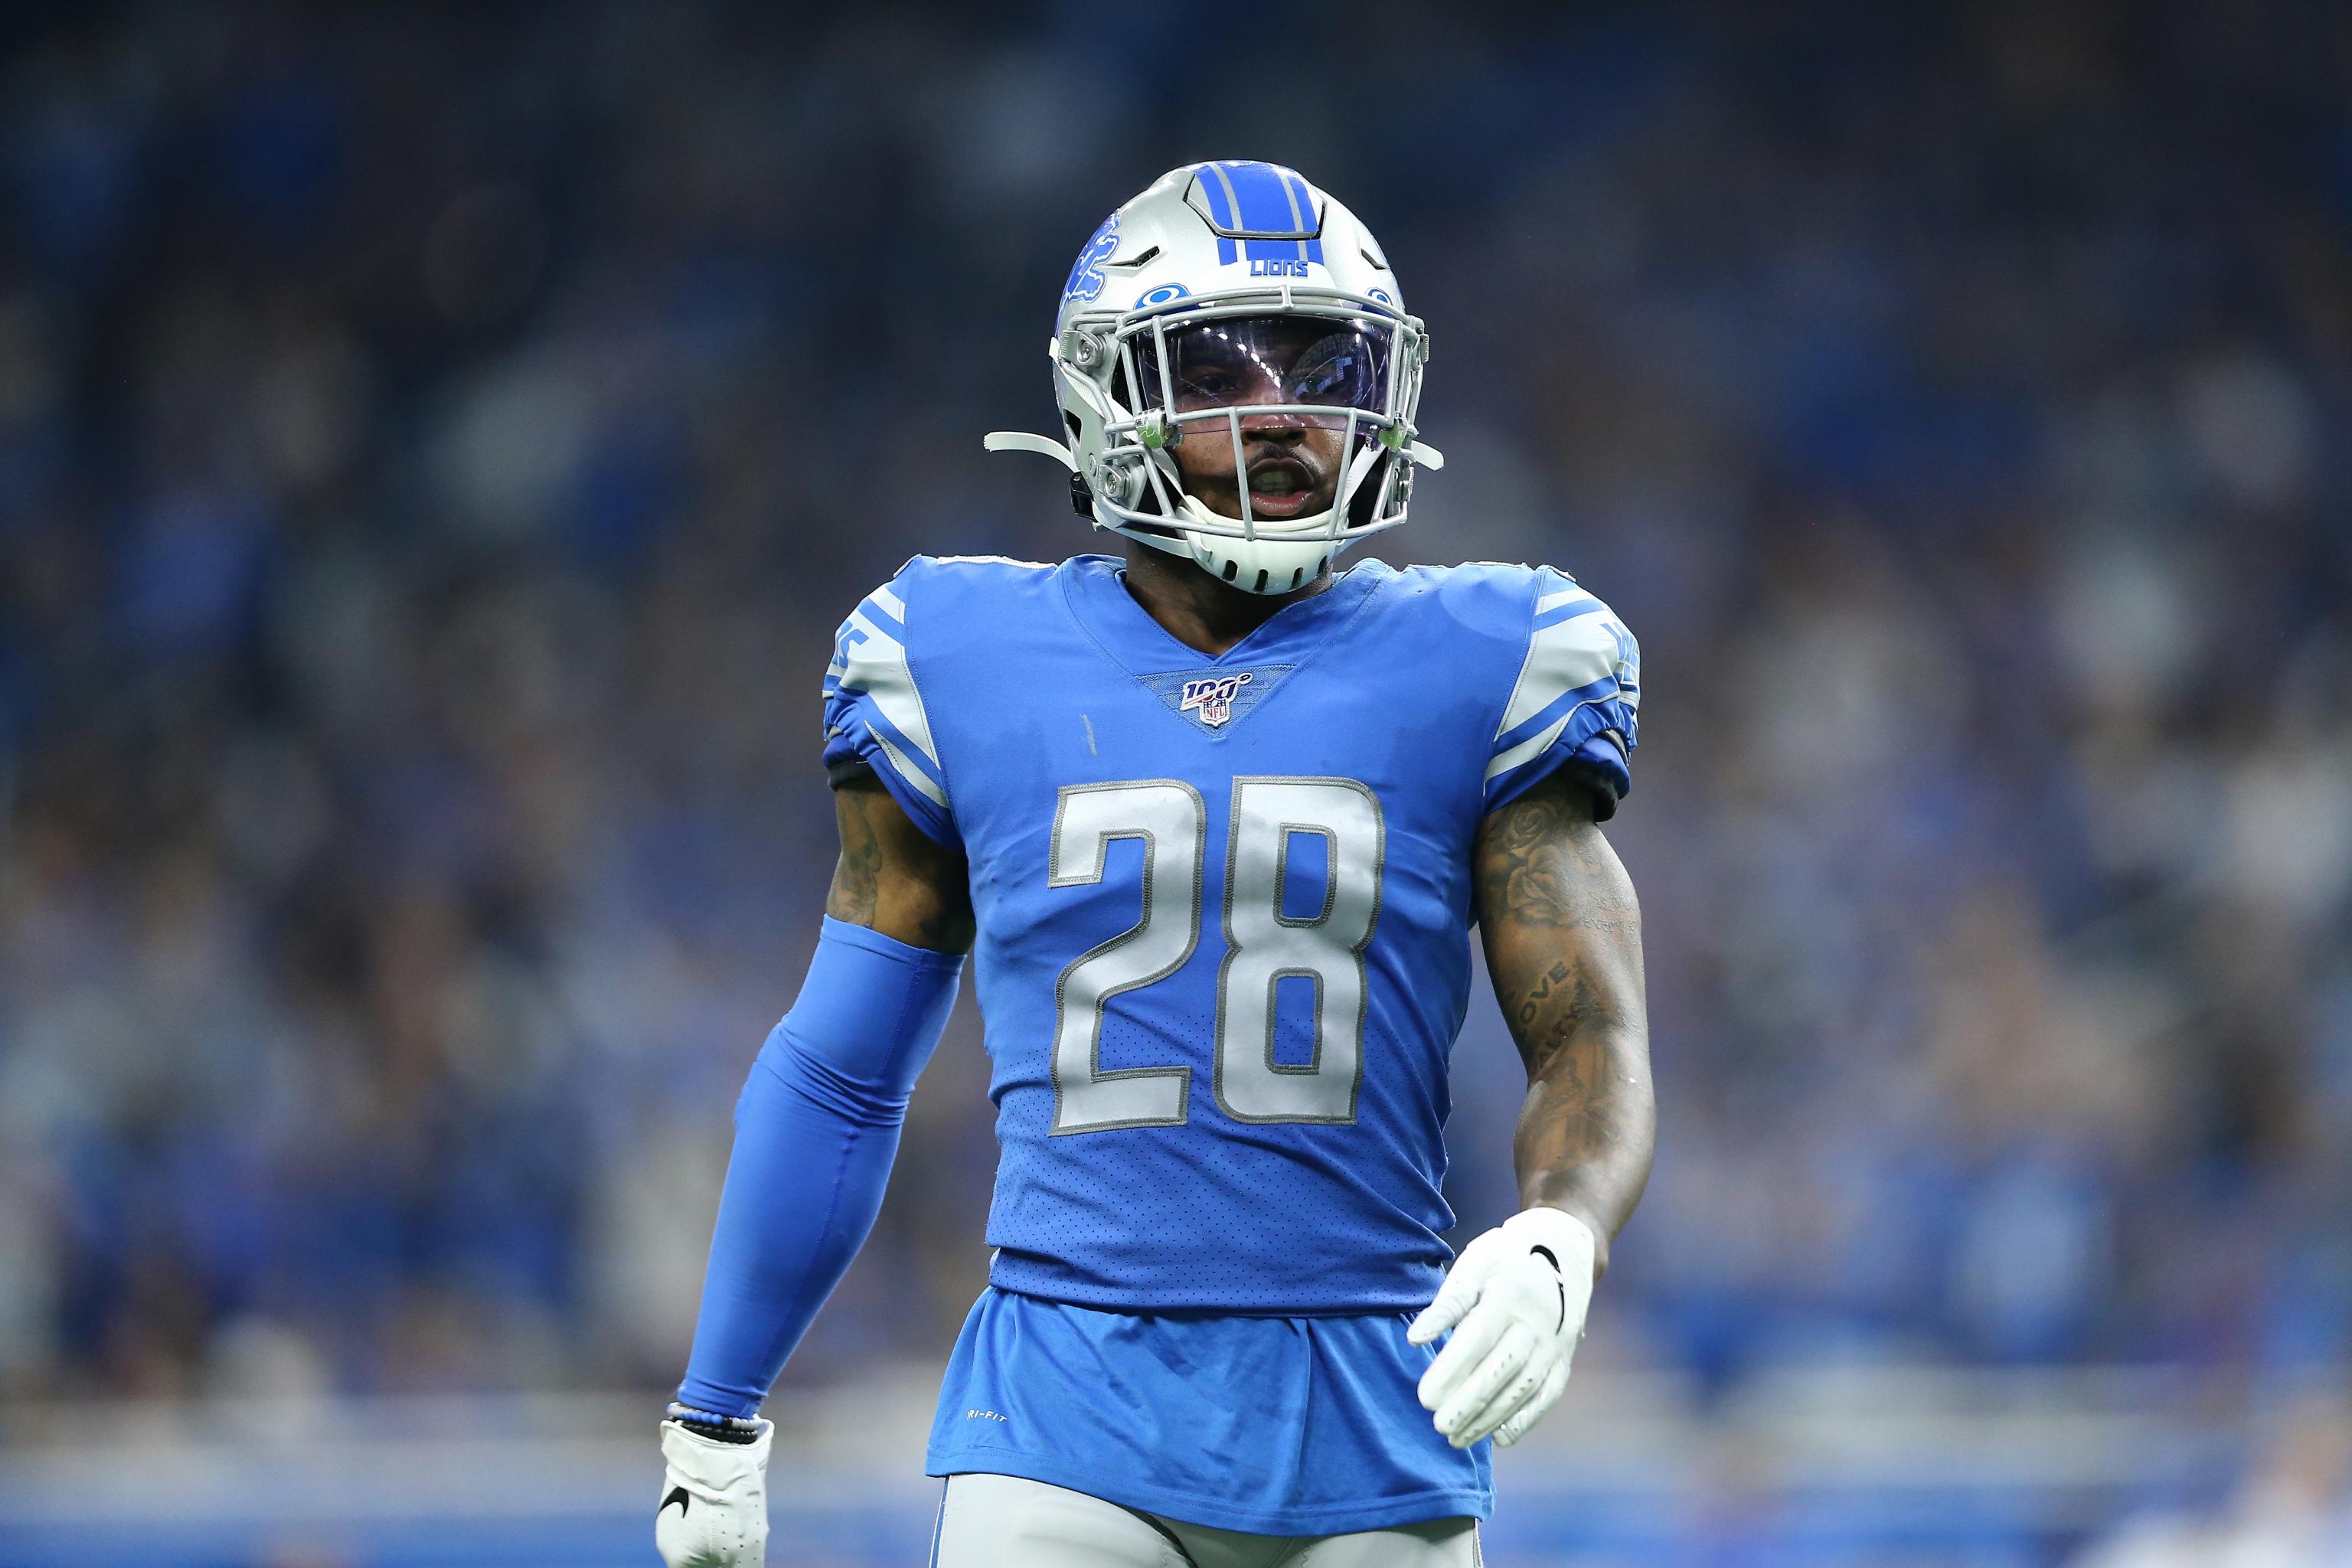 Quandre Diggs 'blindsided' by trade from Lions to Seahawks